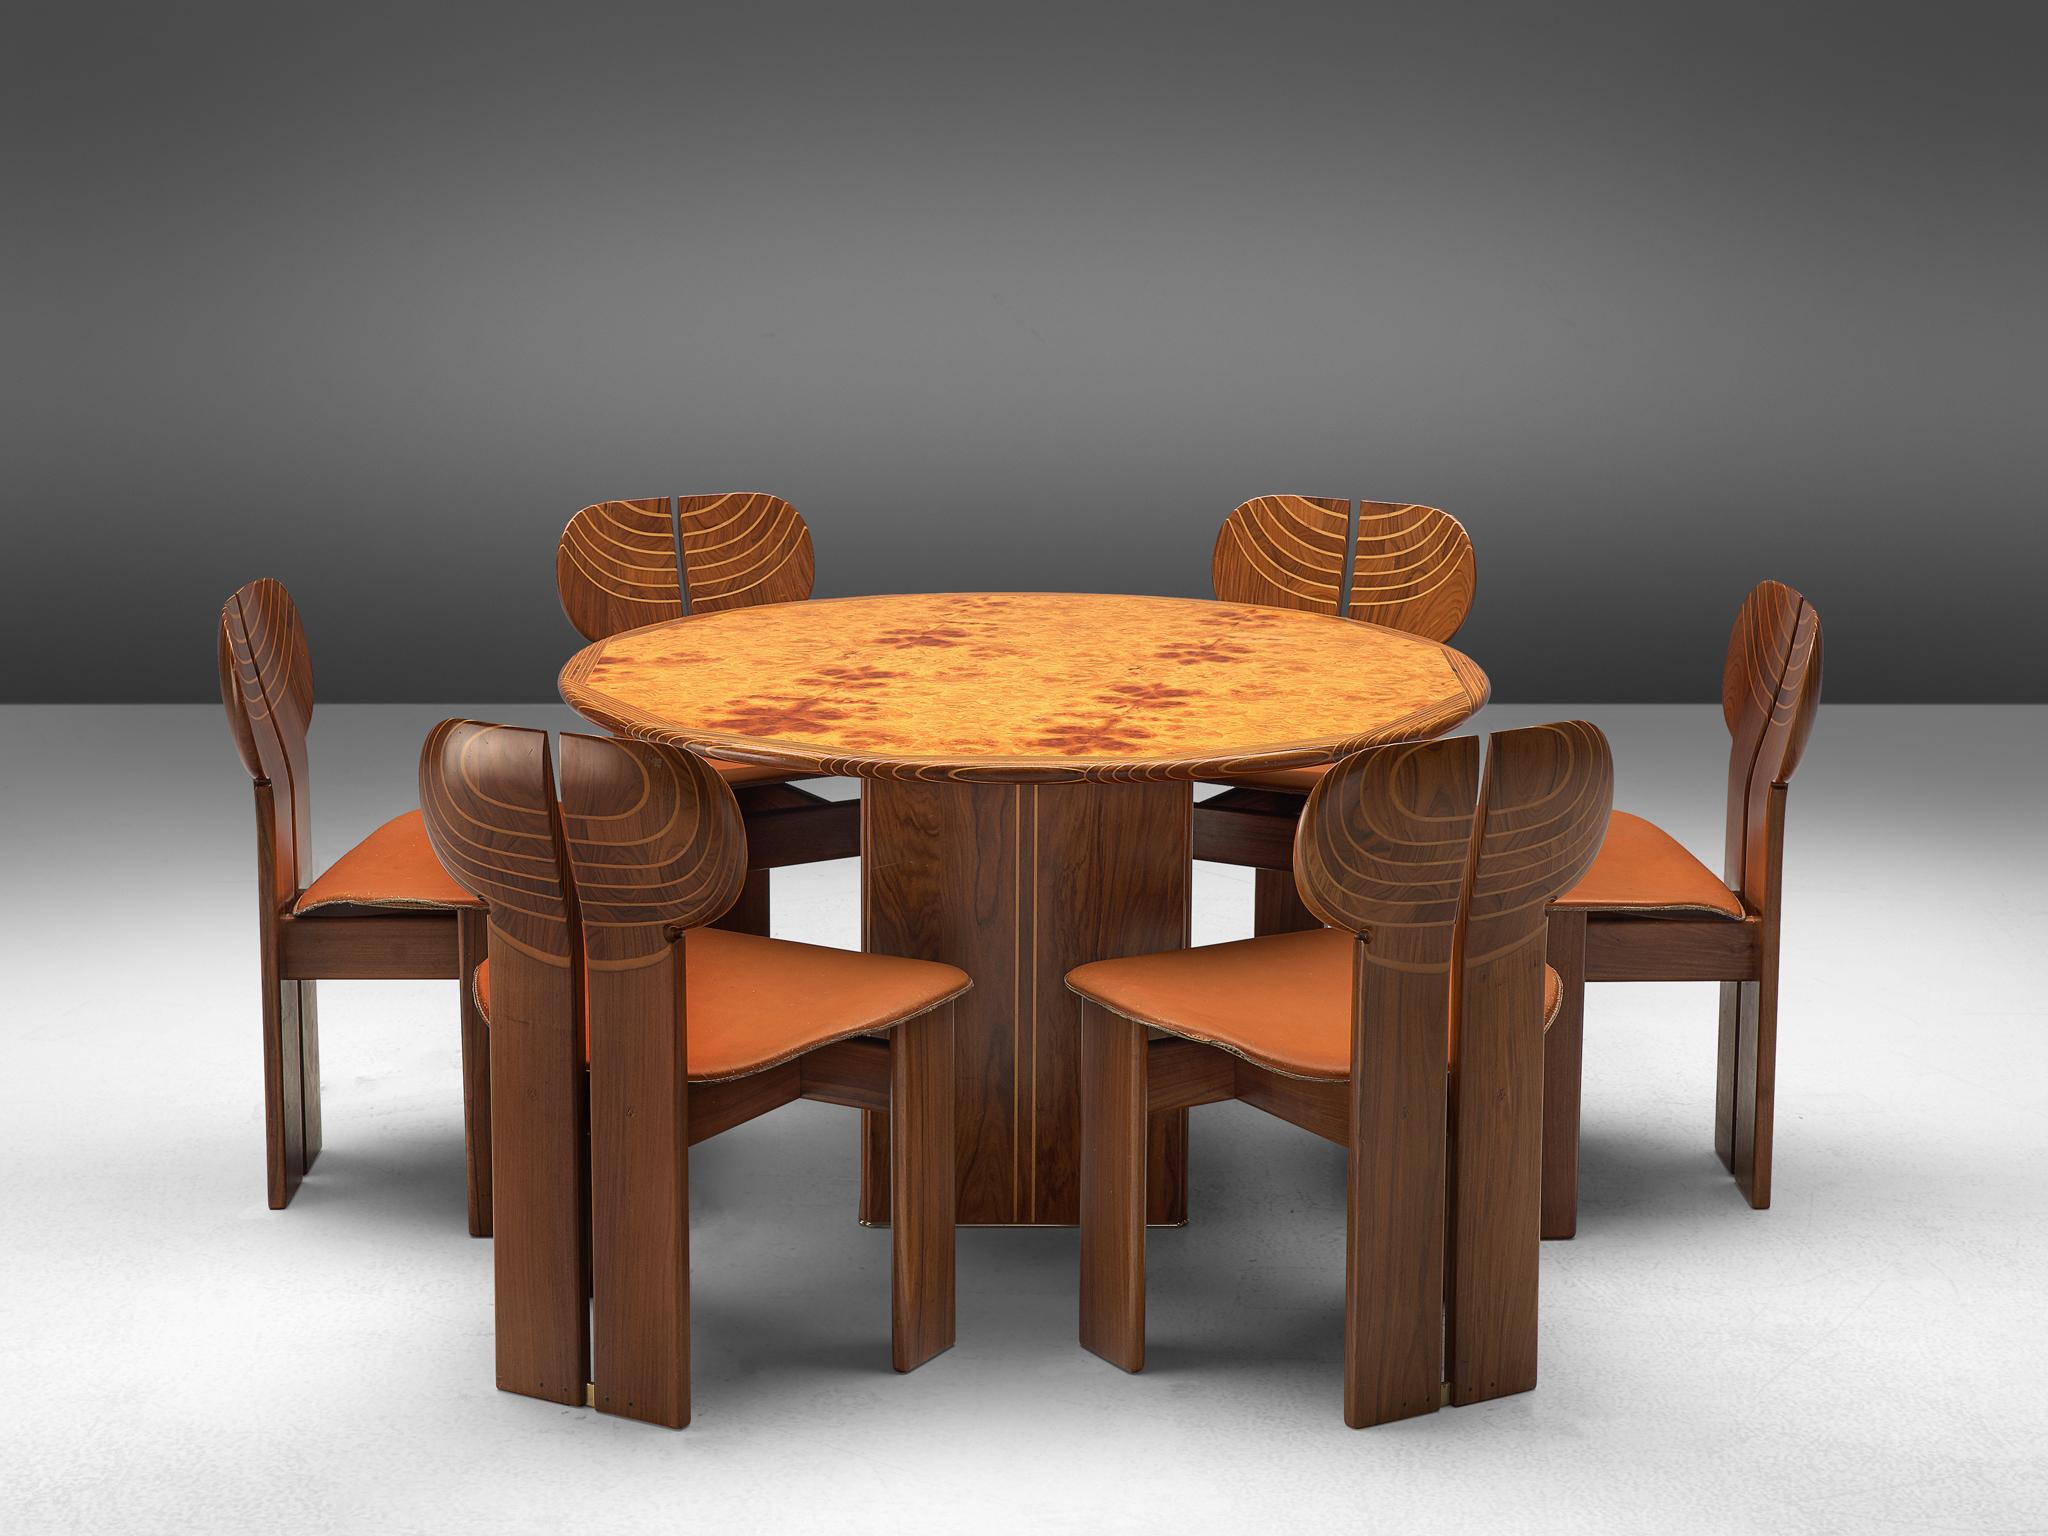 Afra & Tobia Scarpa for Maxalto, dining set, cognac leather, walnut, burl, and brass, Italy, 1975.

This dining set, consisting of 6 chairs and a round table are designed by Afra & Tobia Scarpa and are titled 'Africa' being part of the Artona